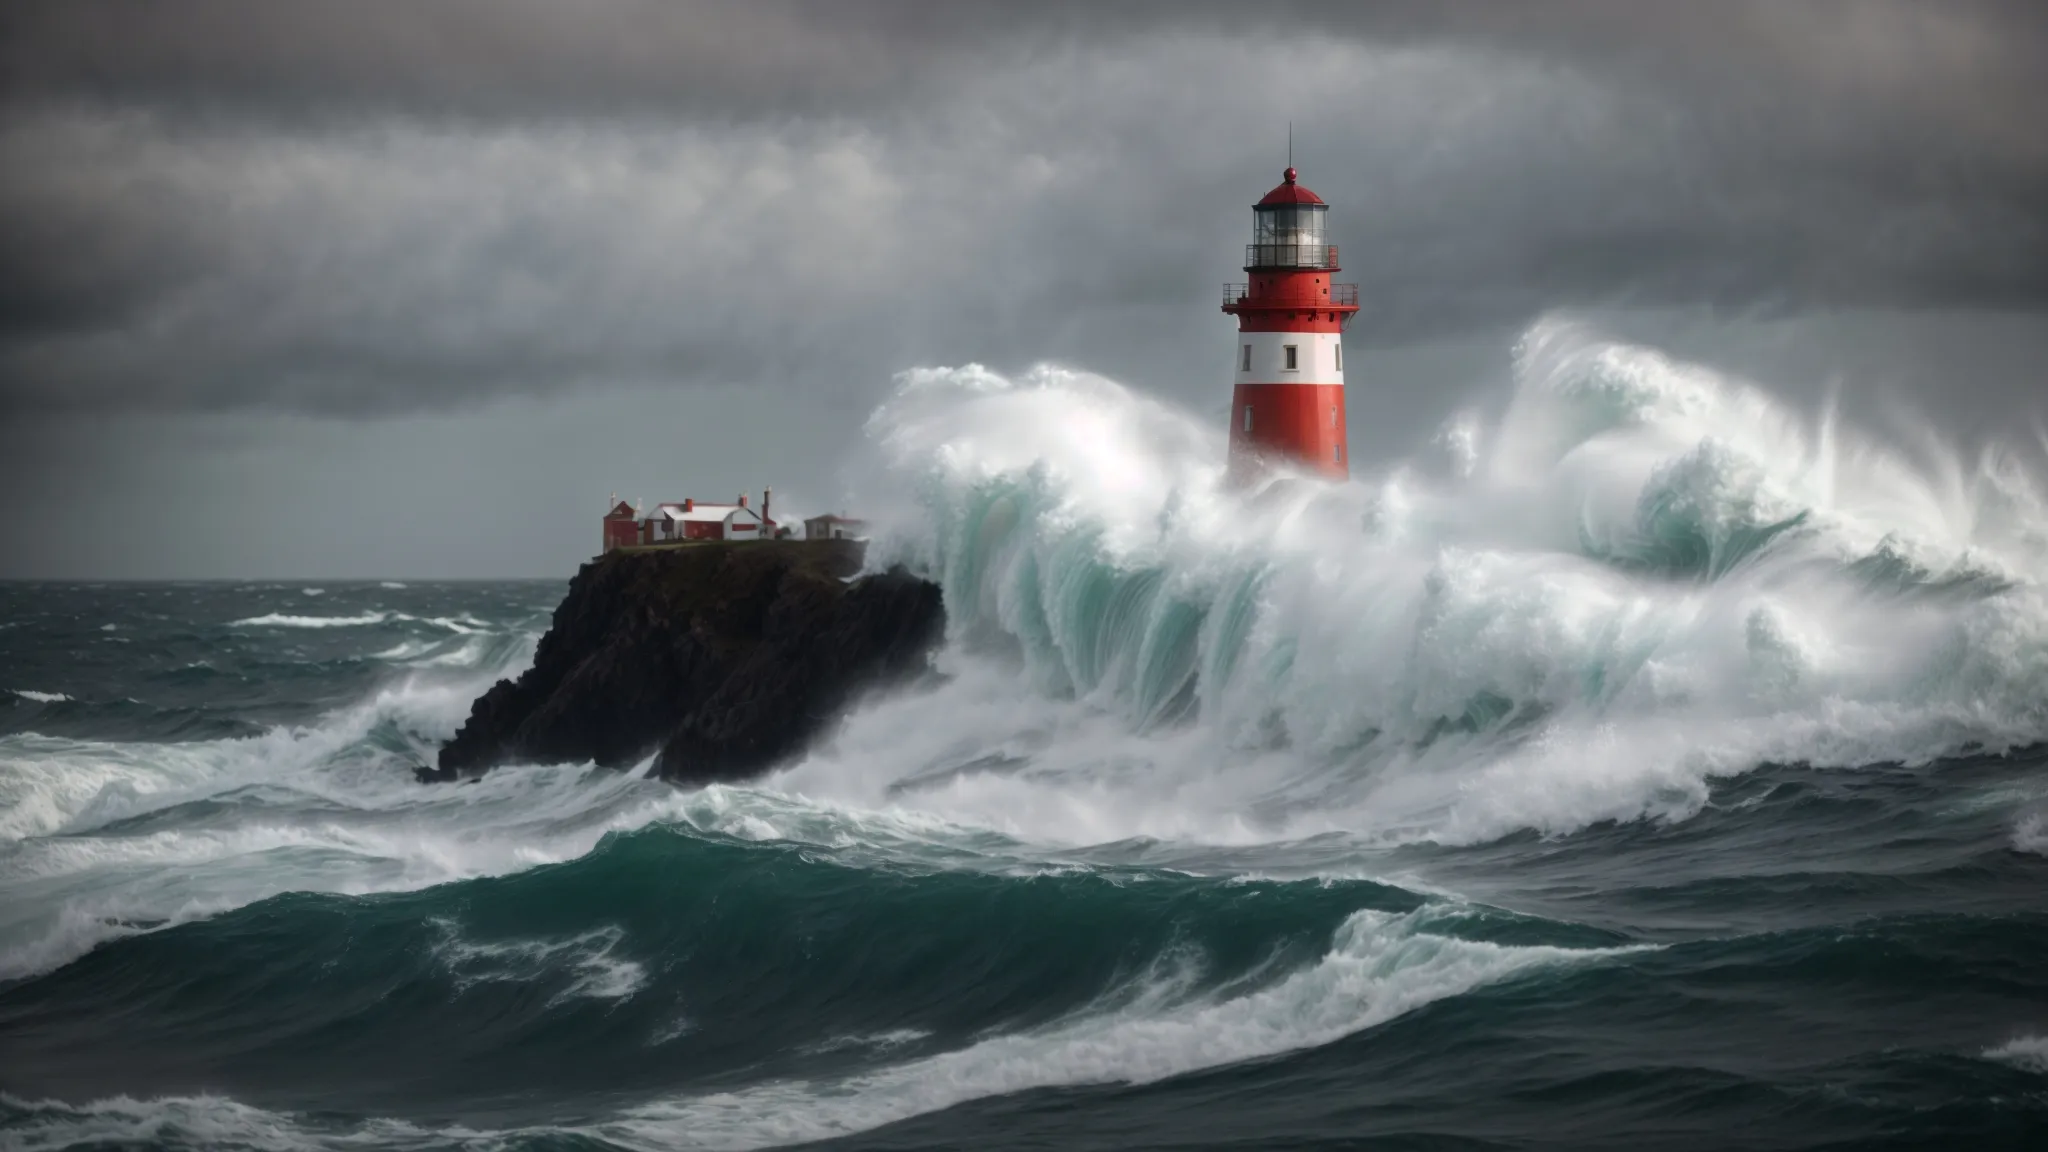 a lighthouse stands tall amidst rough seas, guiding ships safely to shore.